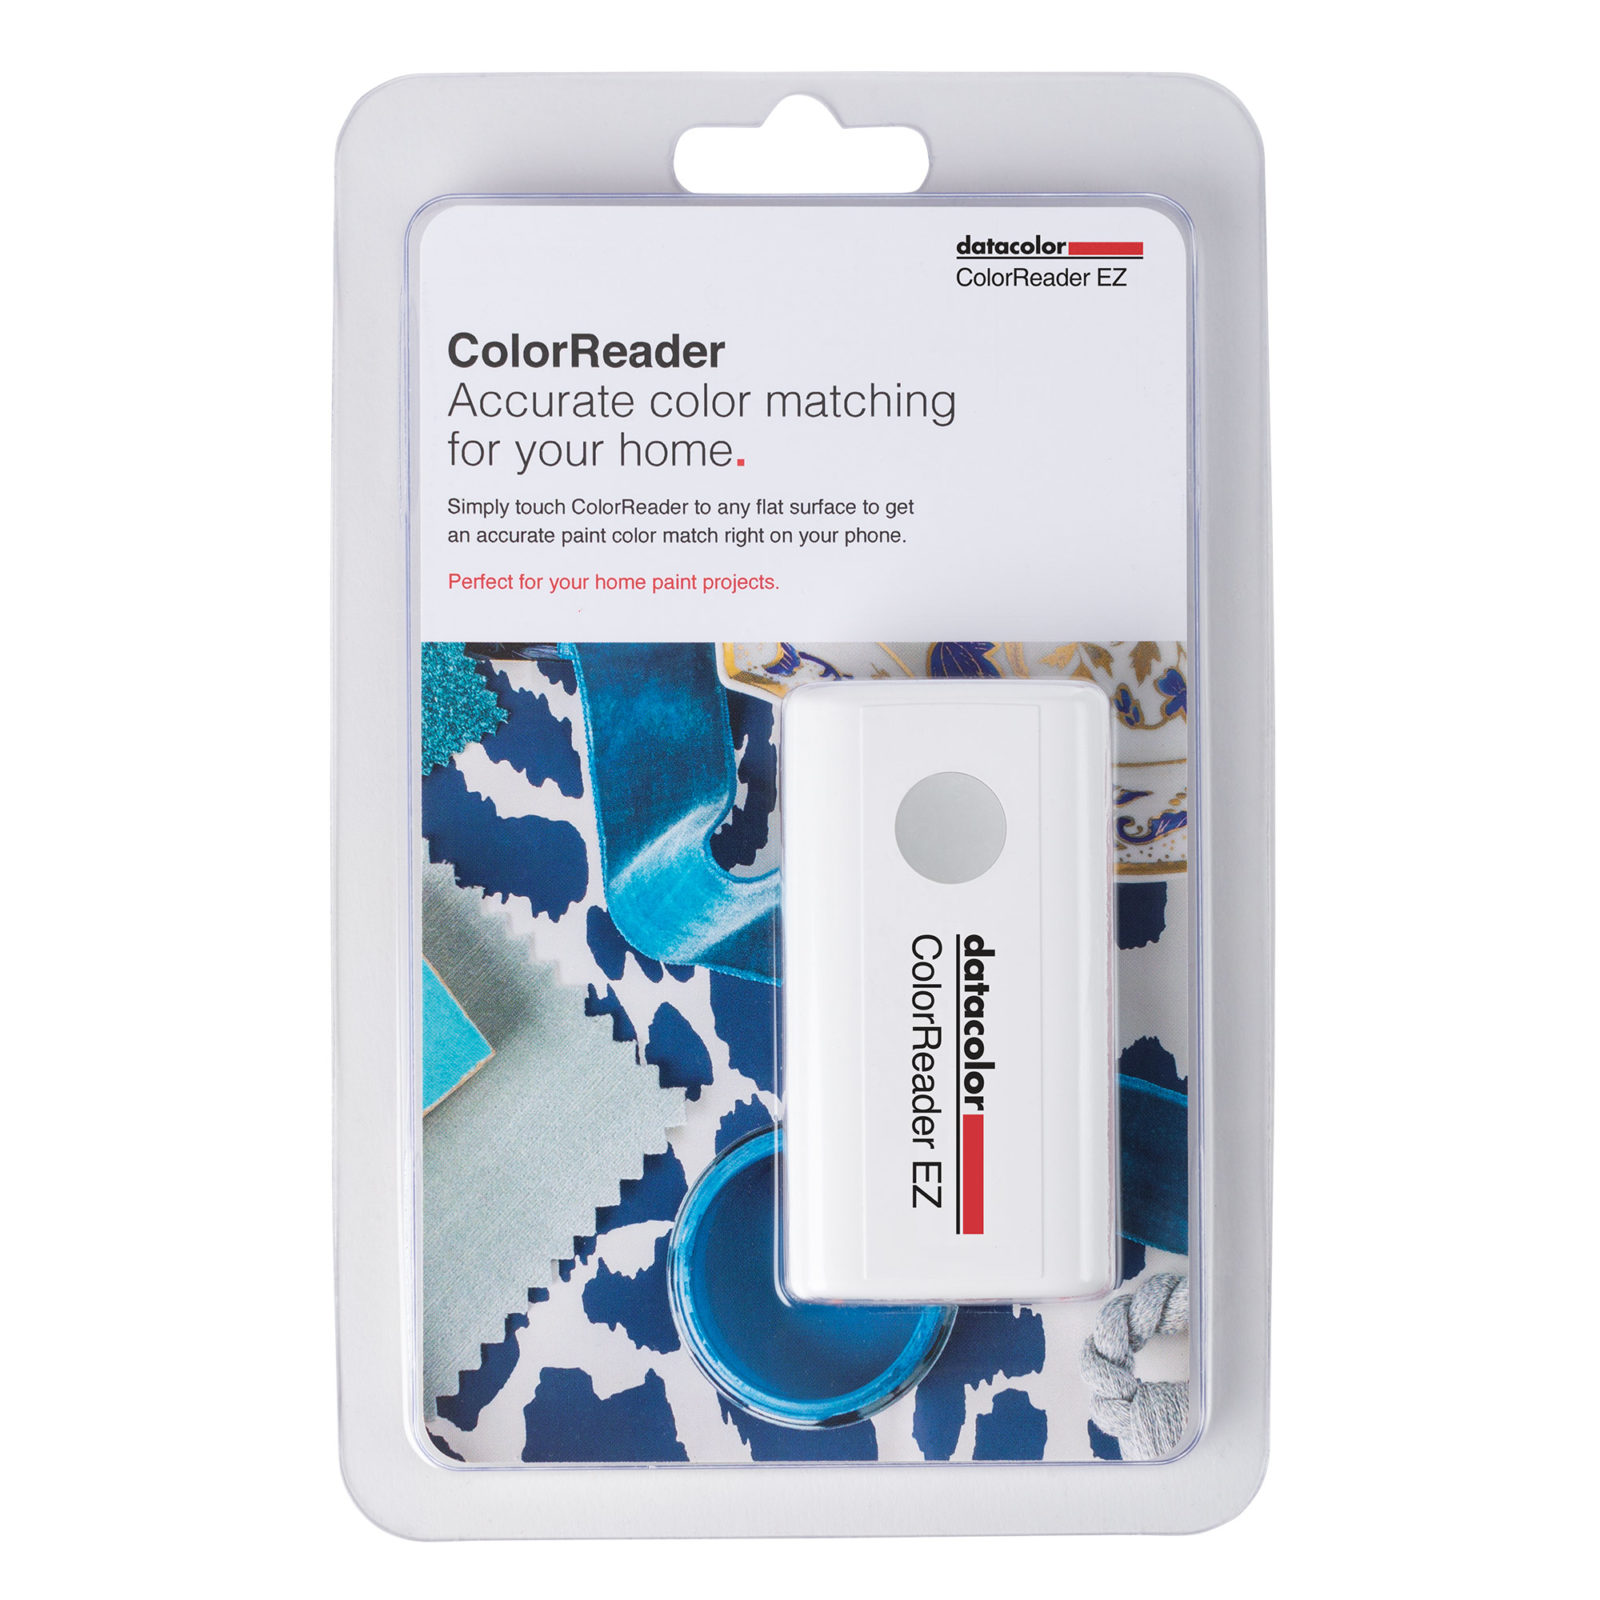 New! Datacolor ColorReader EZ – The Portable Tool that Simplifies Matching,  Selecting and Coordinating Paint Colors for the Home for Today's DIYers